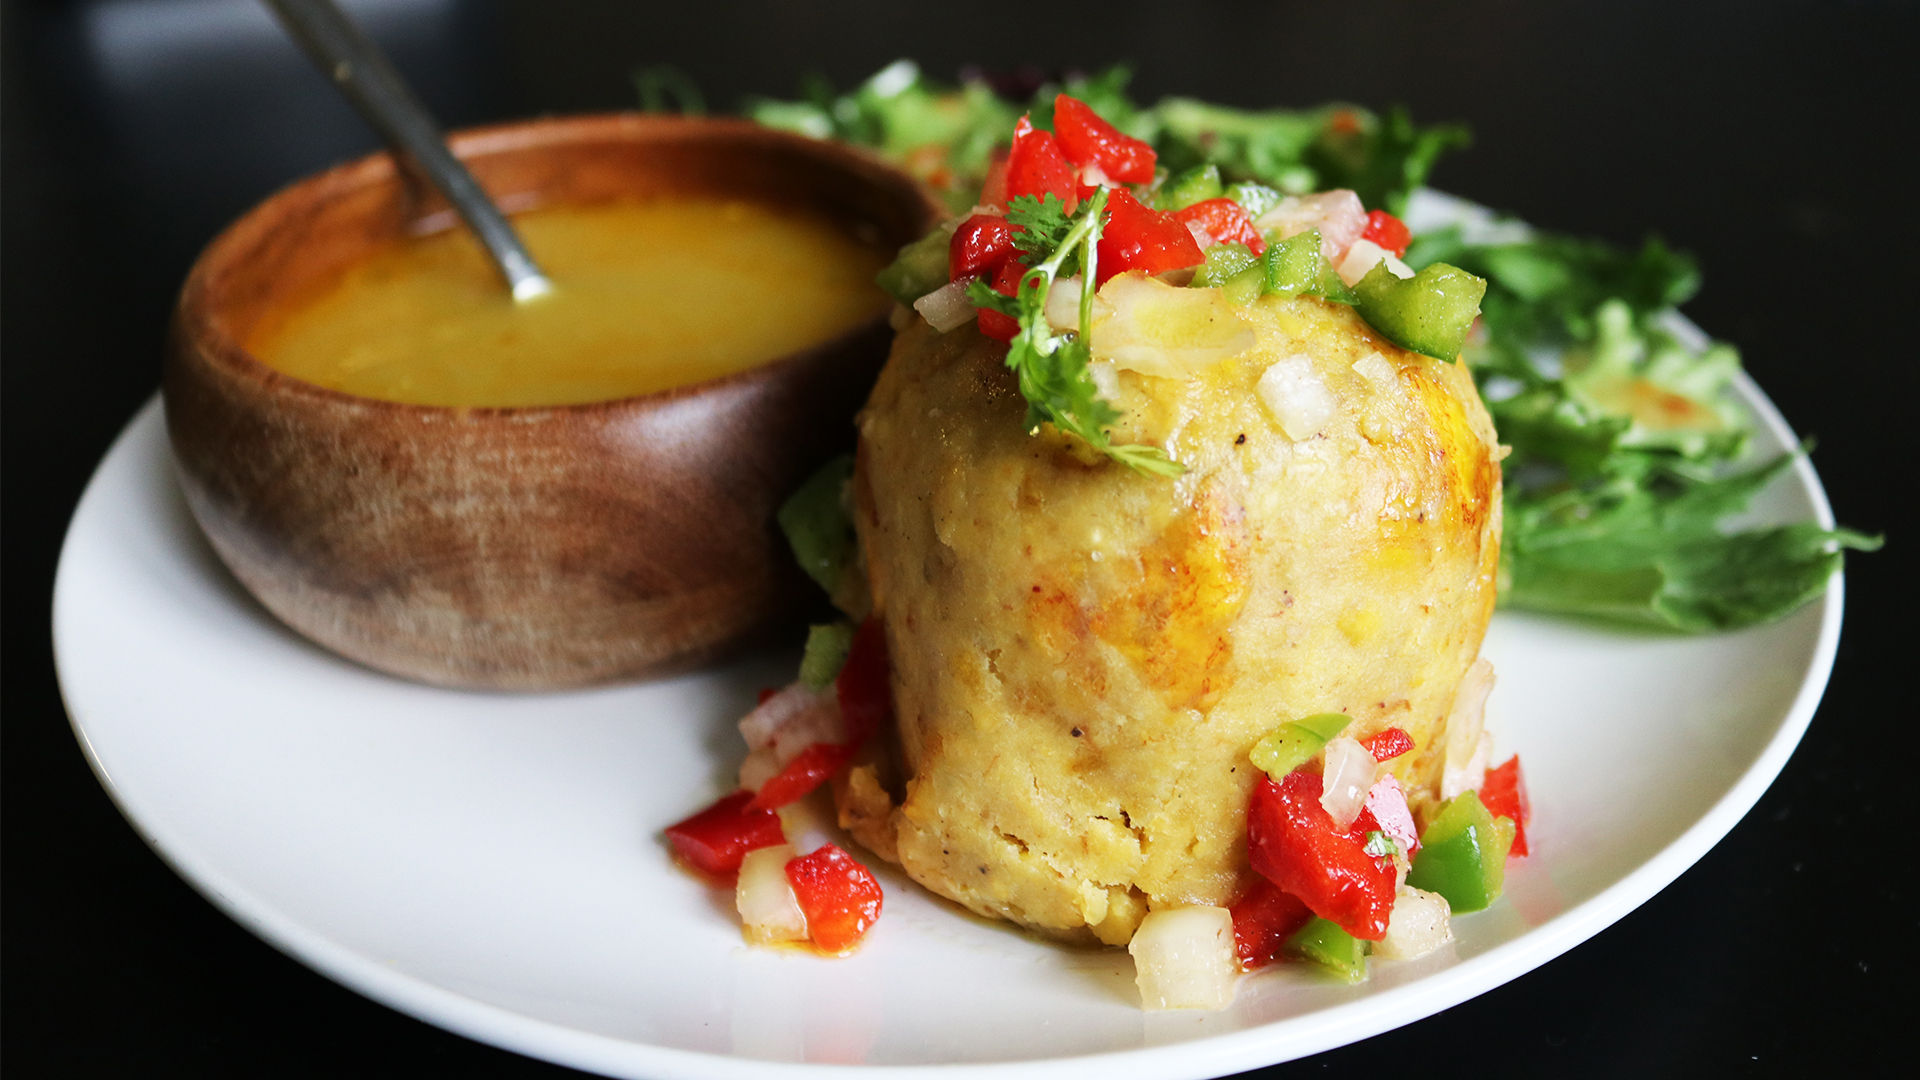 Bajan cou cou with spicy fish - Recipes - Healthier Families - NHS